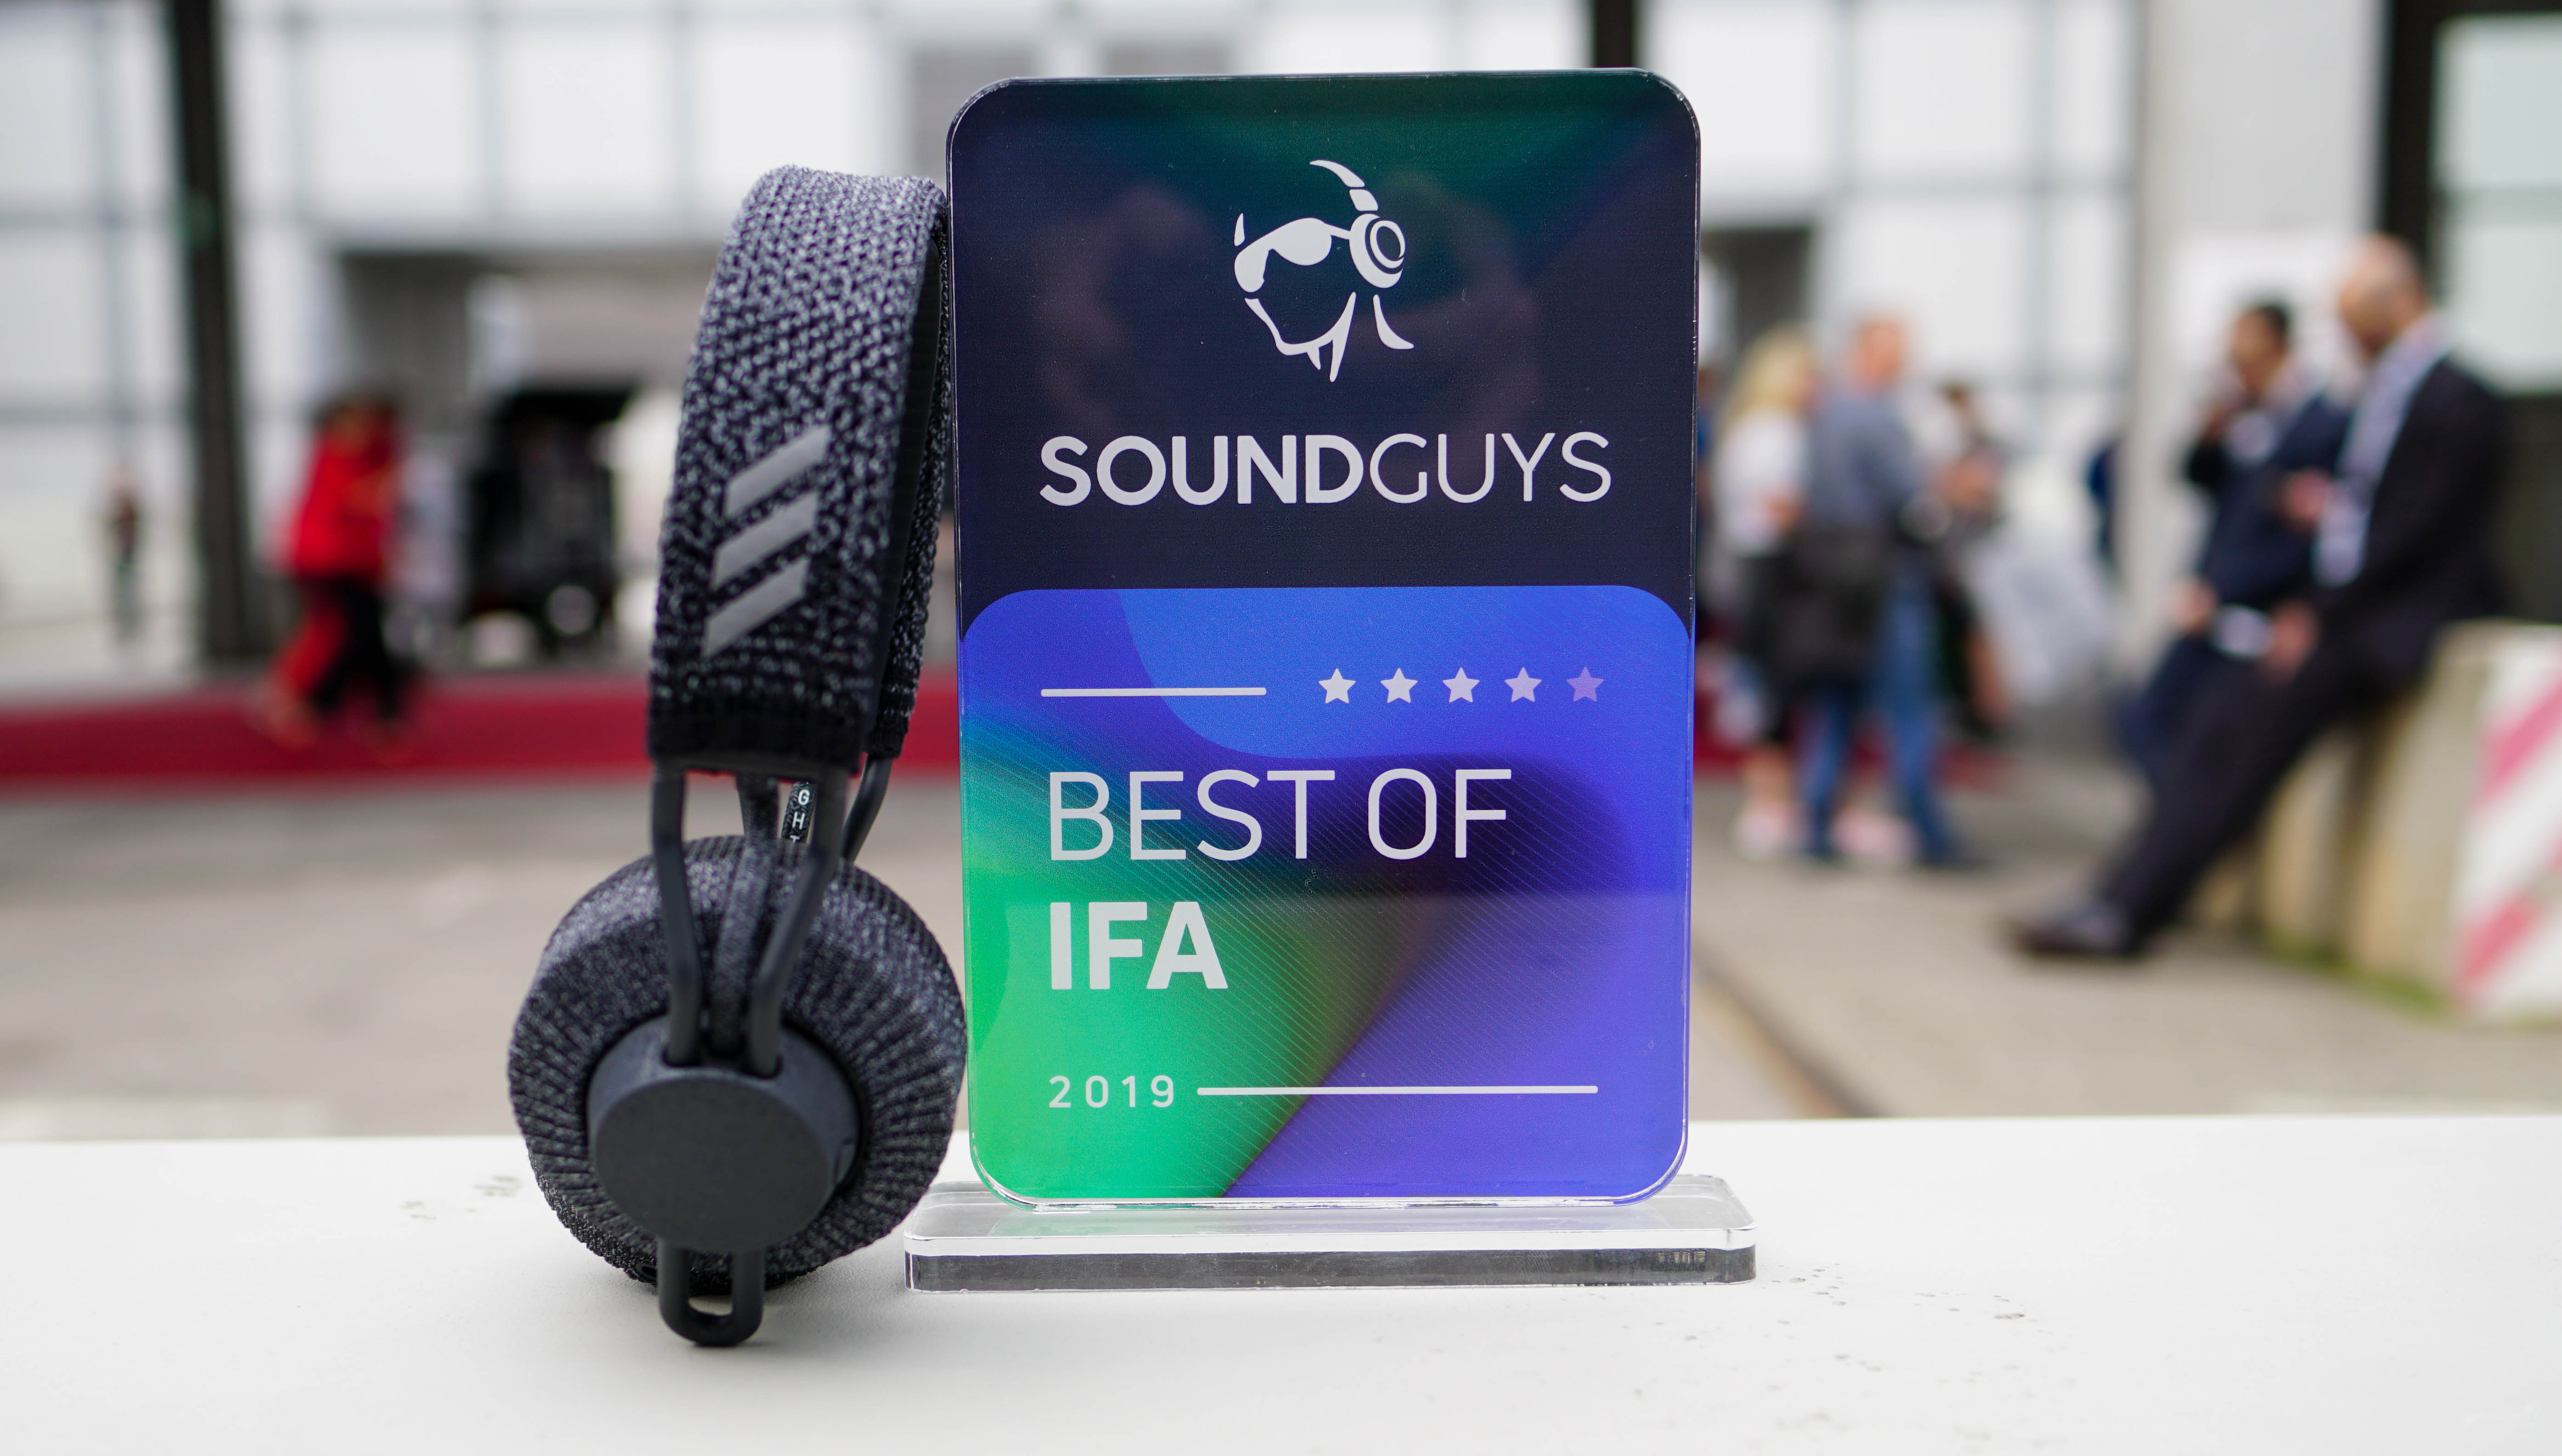 A photo of the Adidas RPT-01 standing next to the SoundGuys Best of IFA 2019 award.